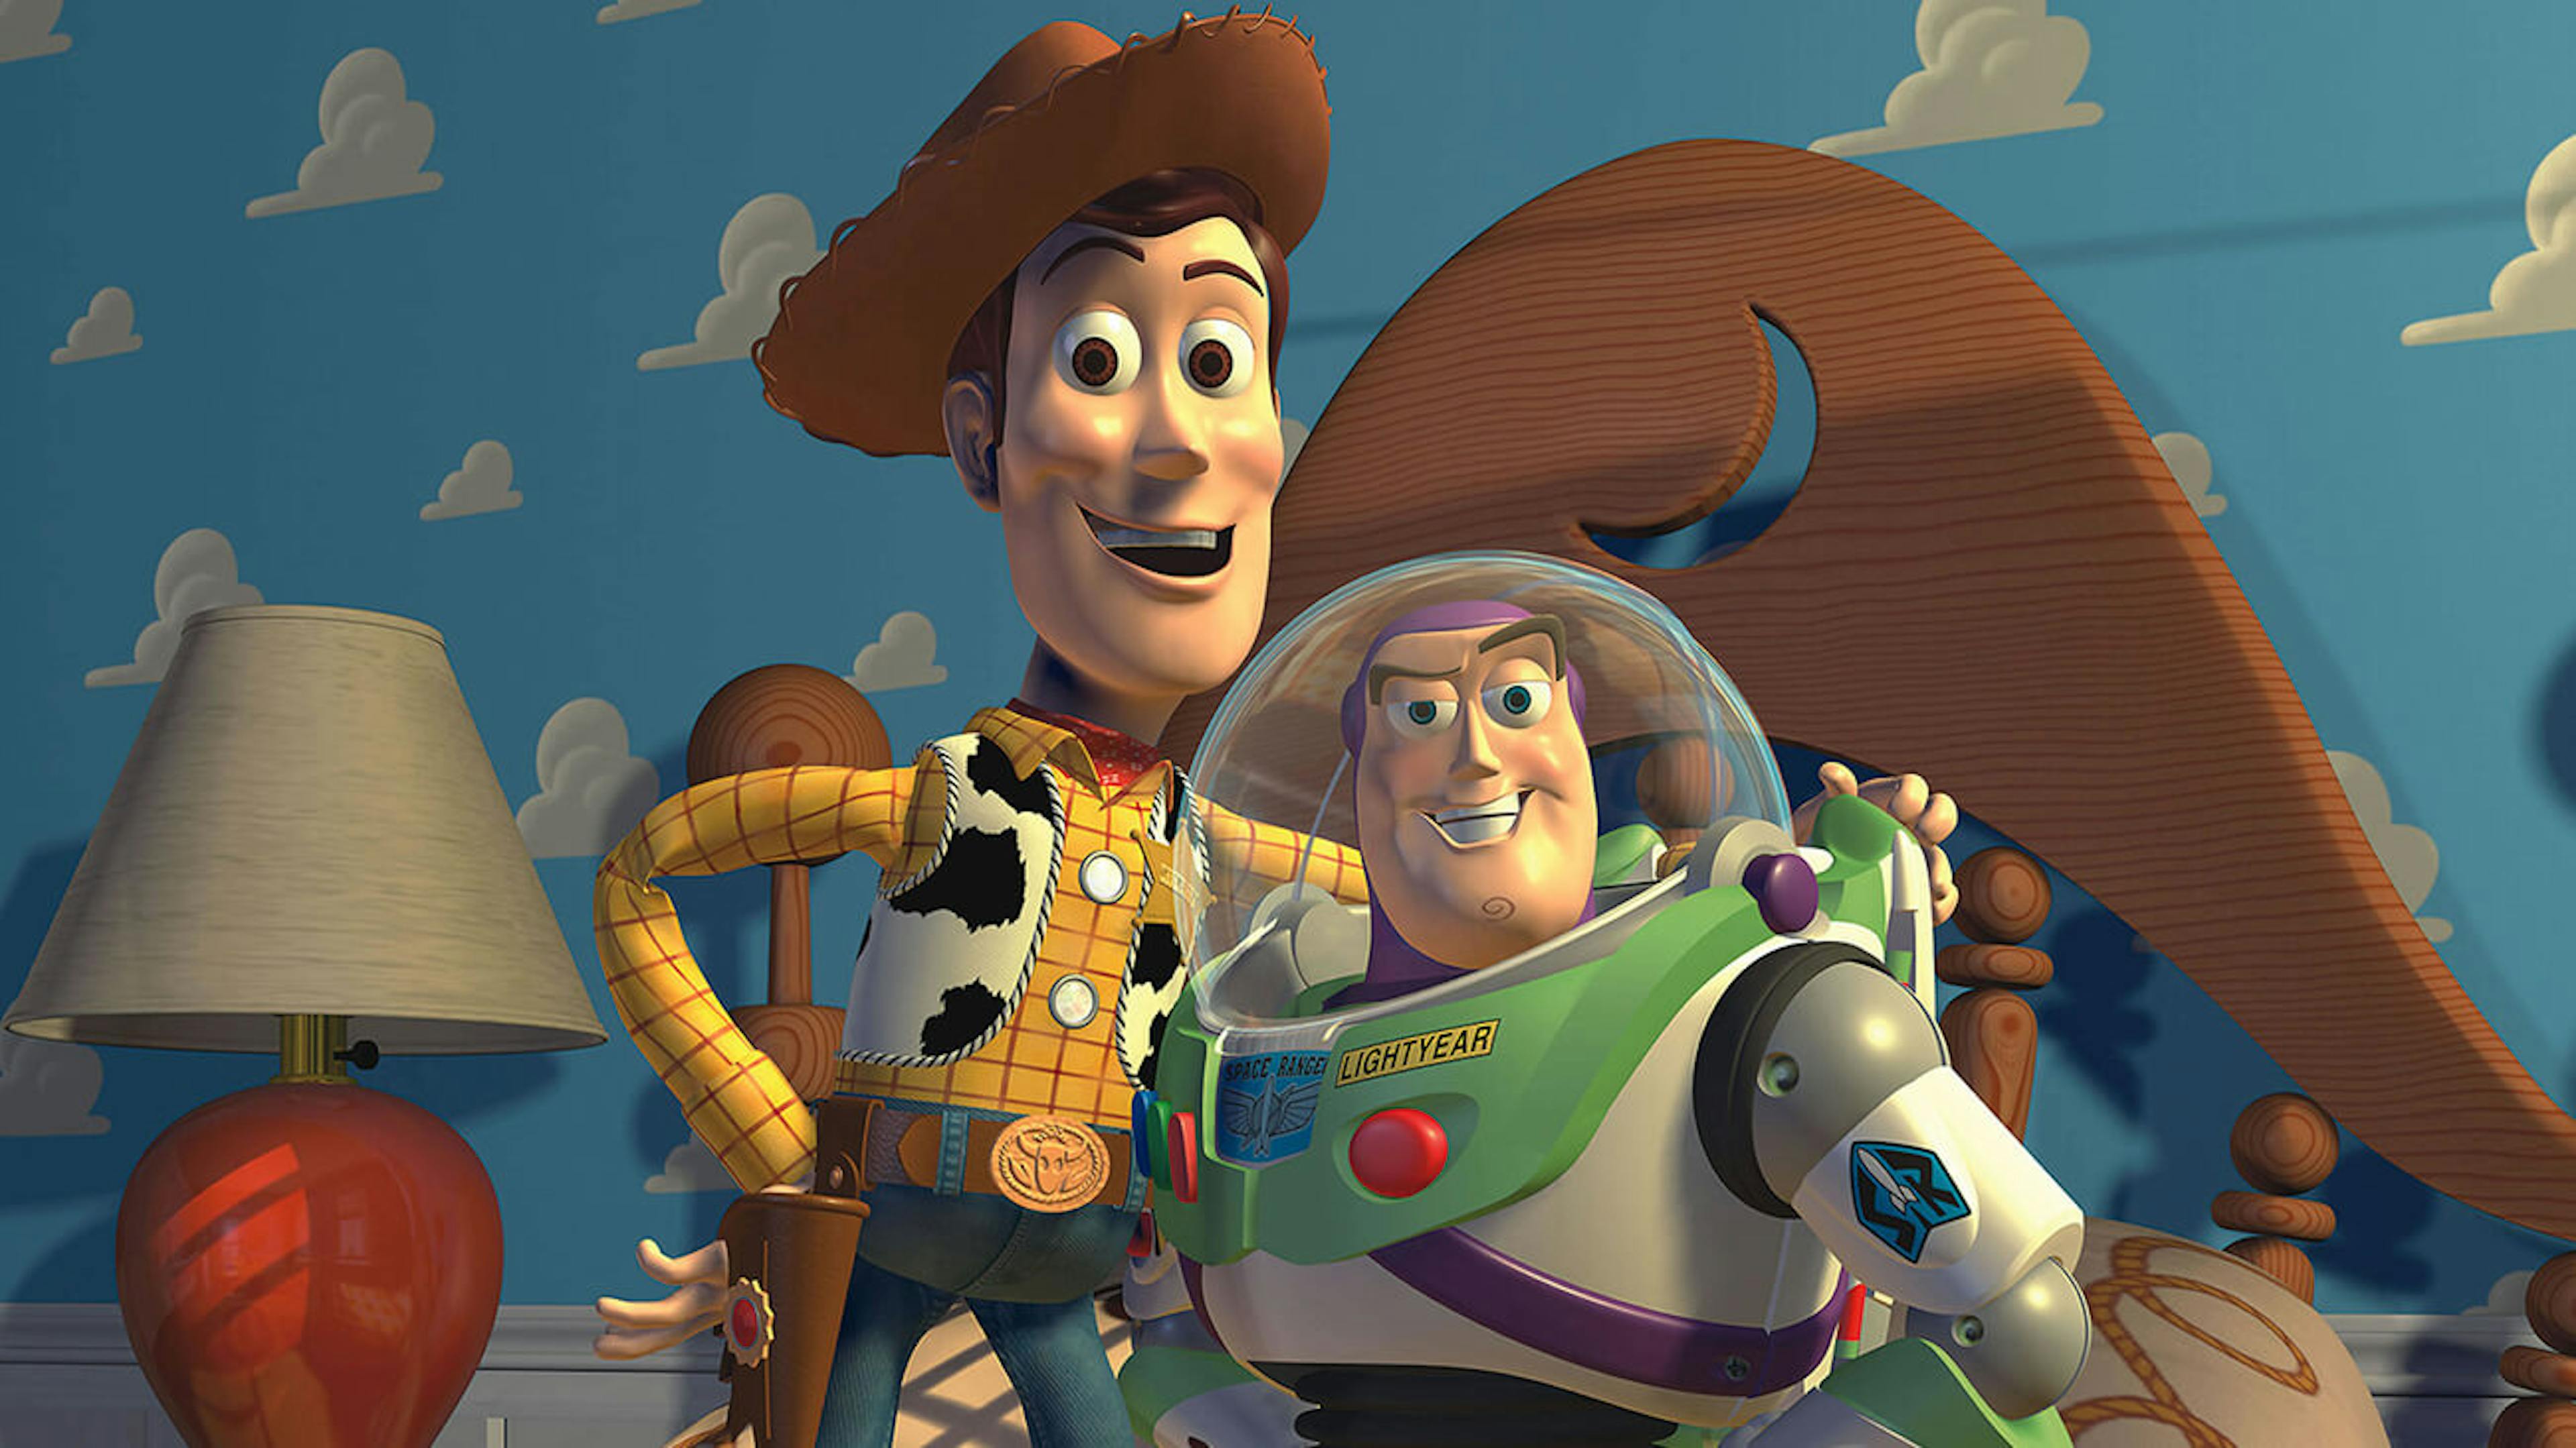 Still from the movie Toy Story